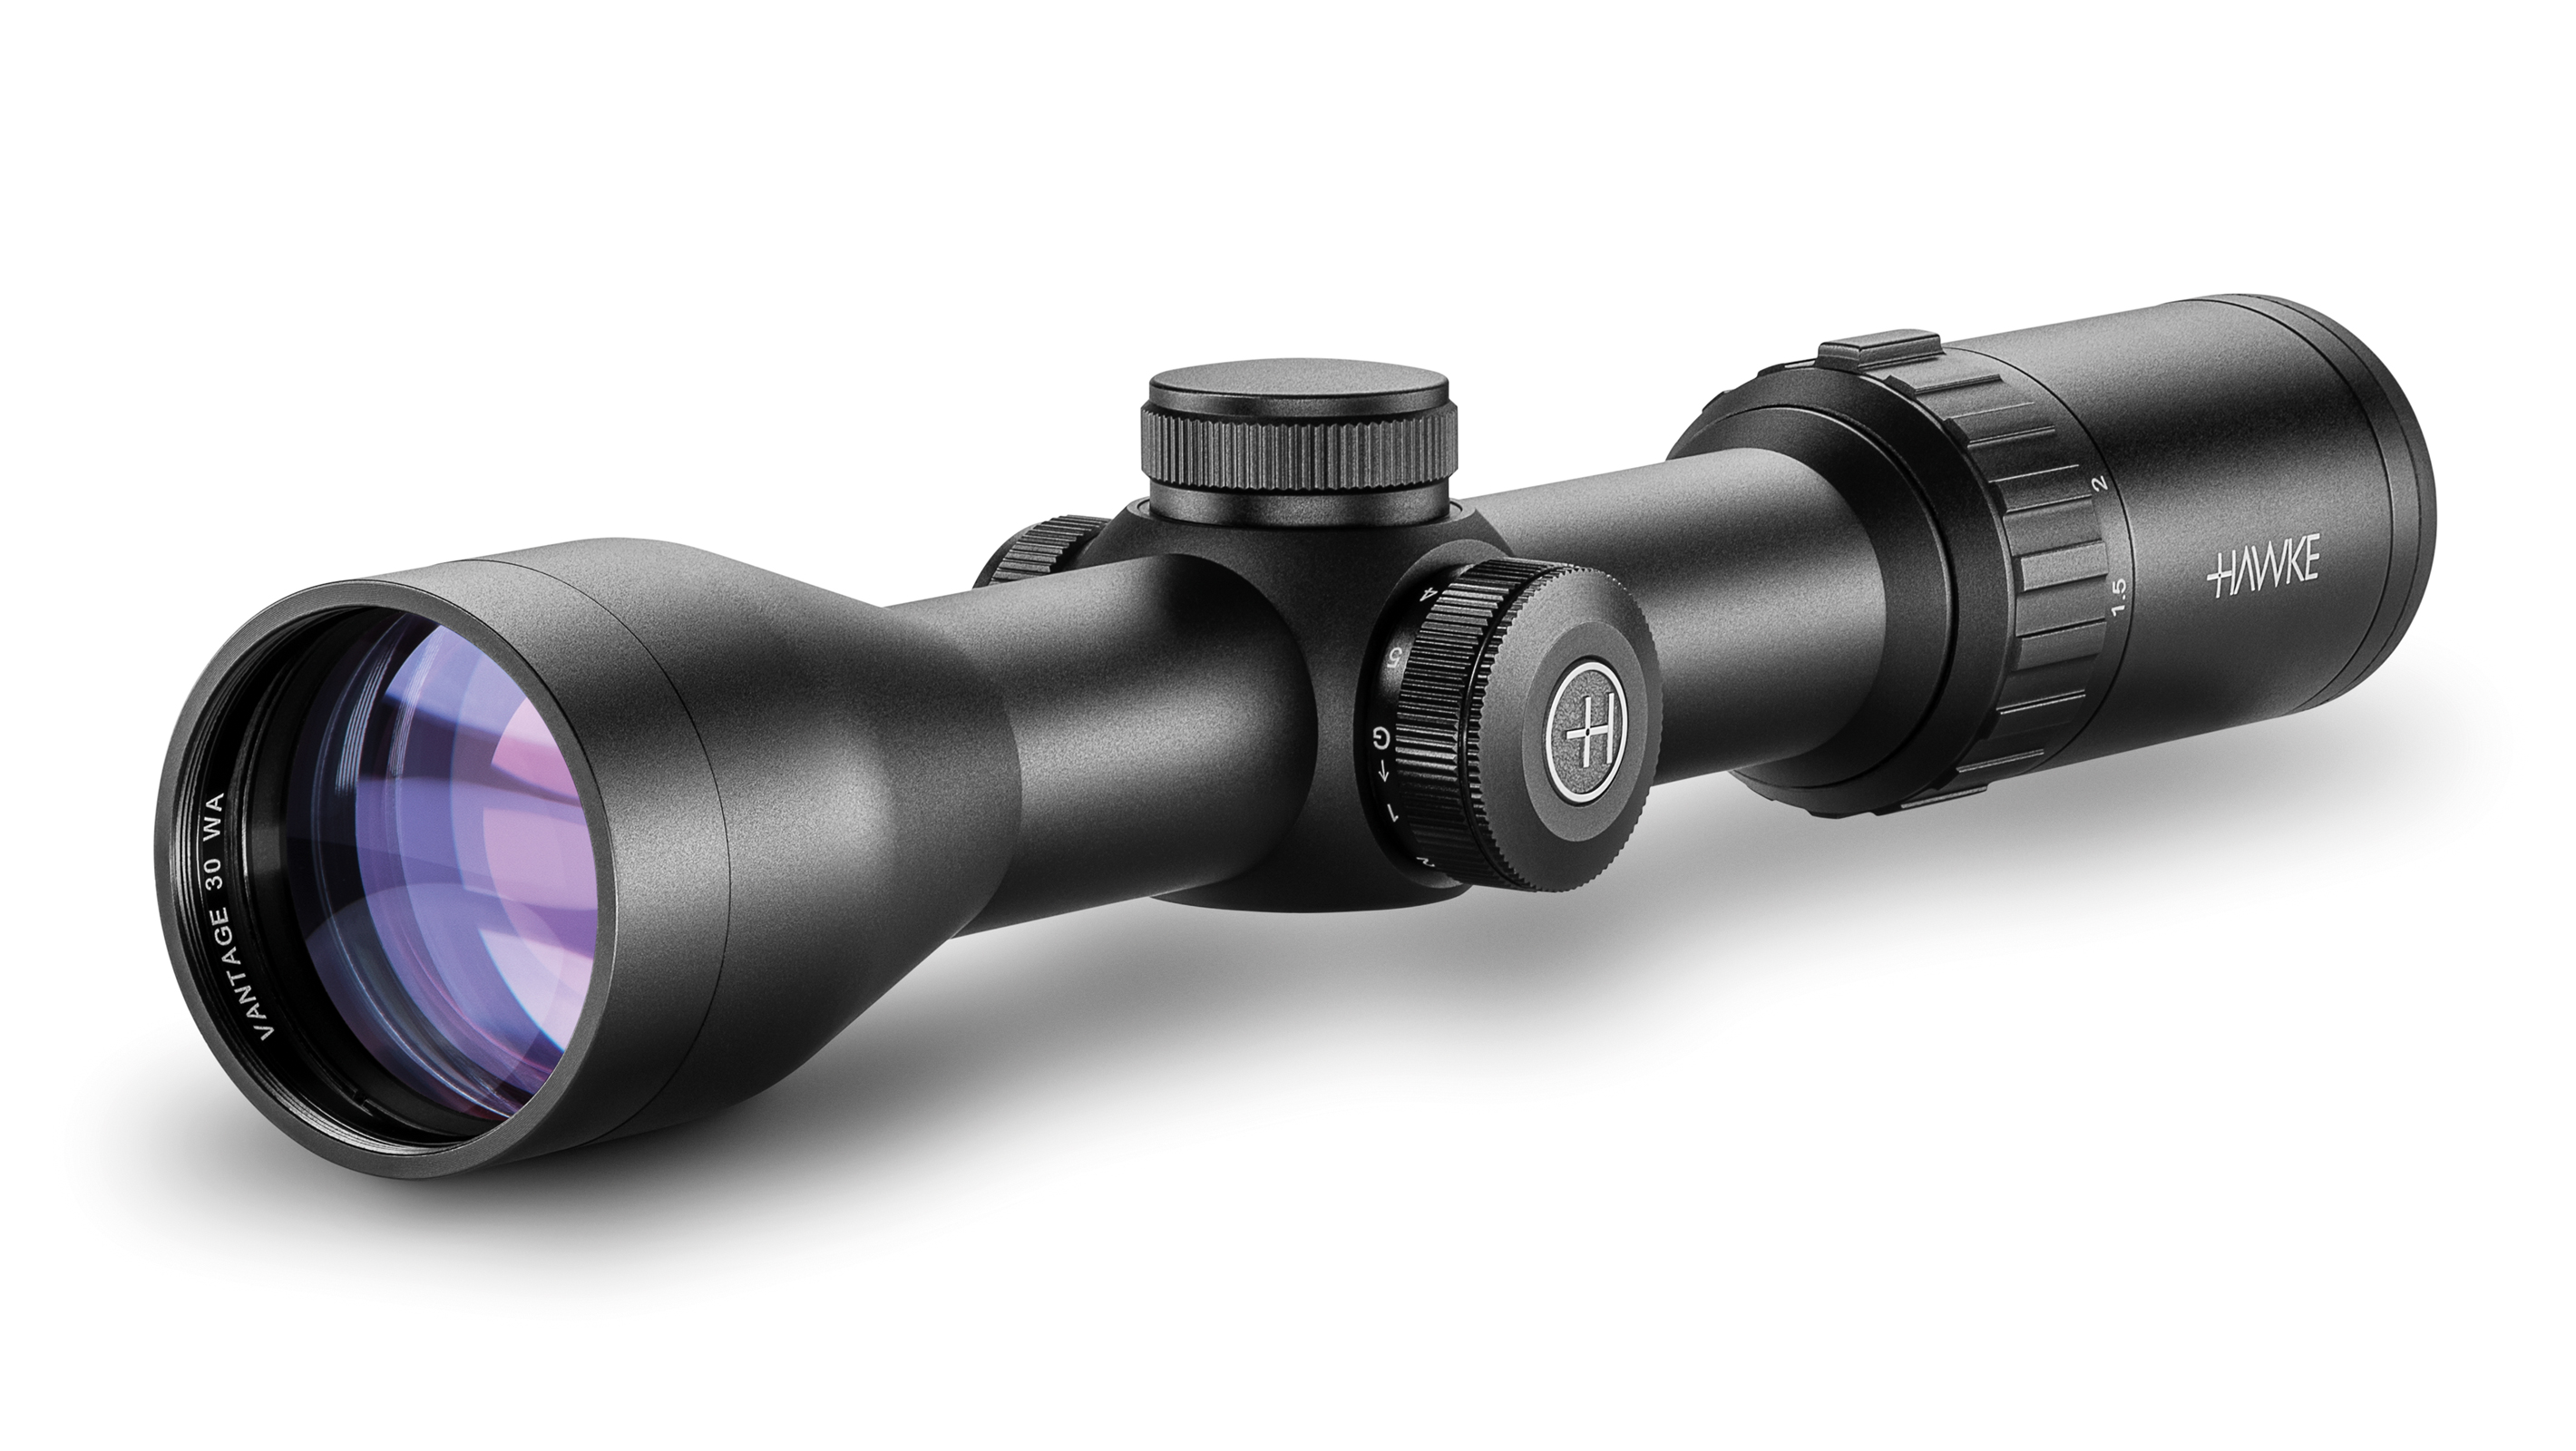 Objective End View Of The Hawke Vantage 30 WA 1.5-6x44 L4A Dot Rifle Scope